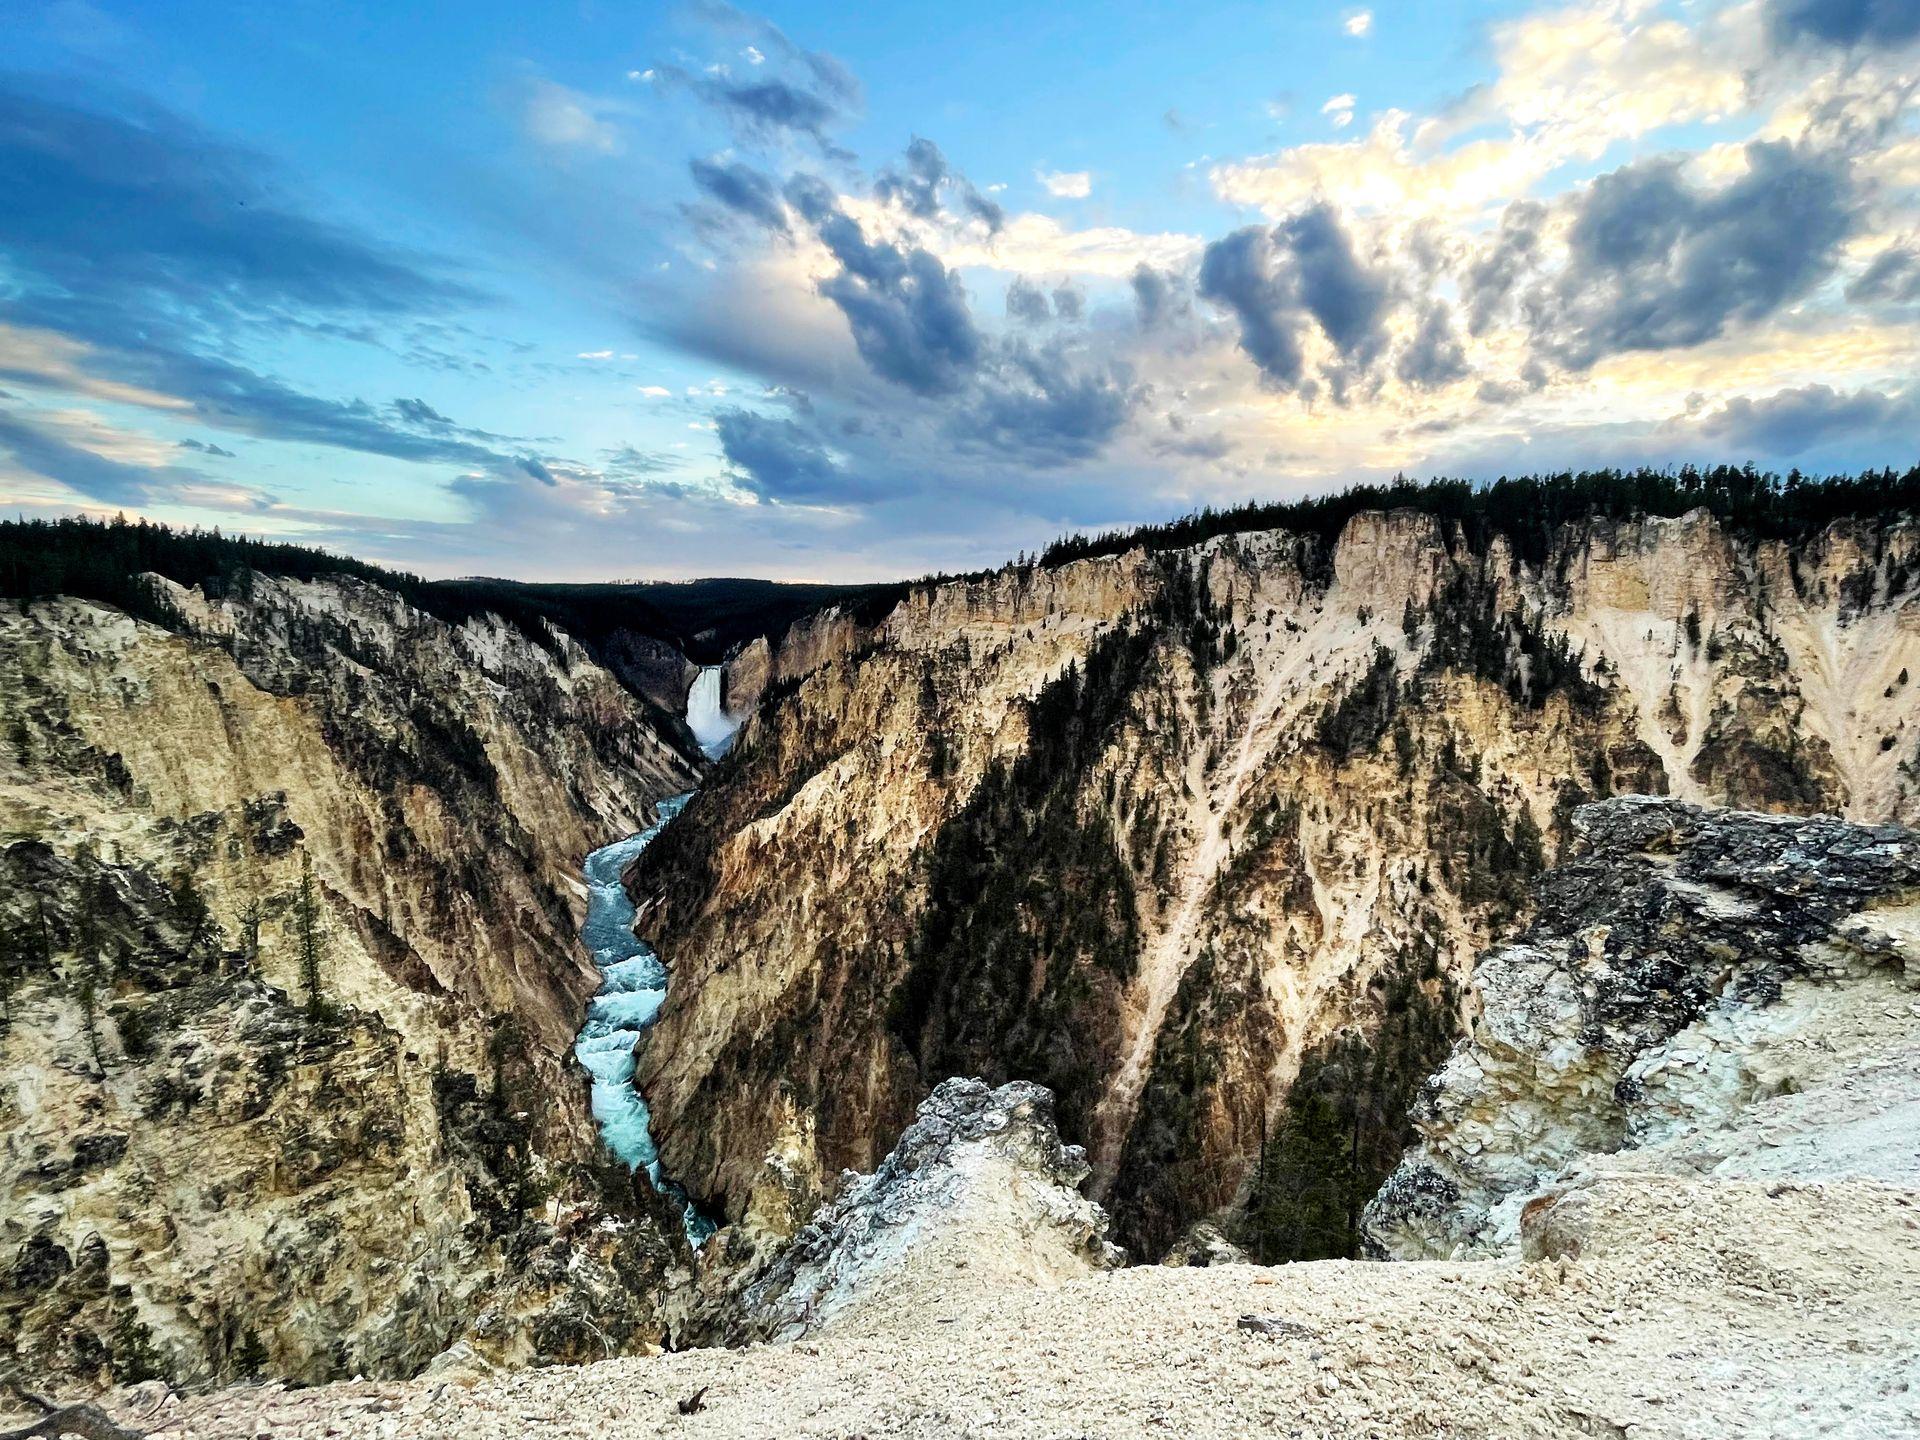 A view of Artist's Point at sunset. It's a canyon with a river running through it.